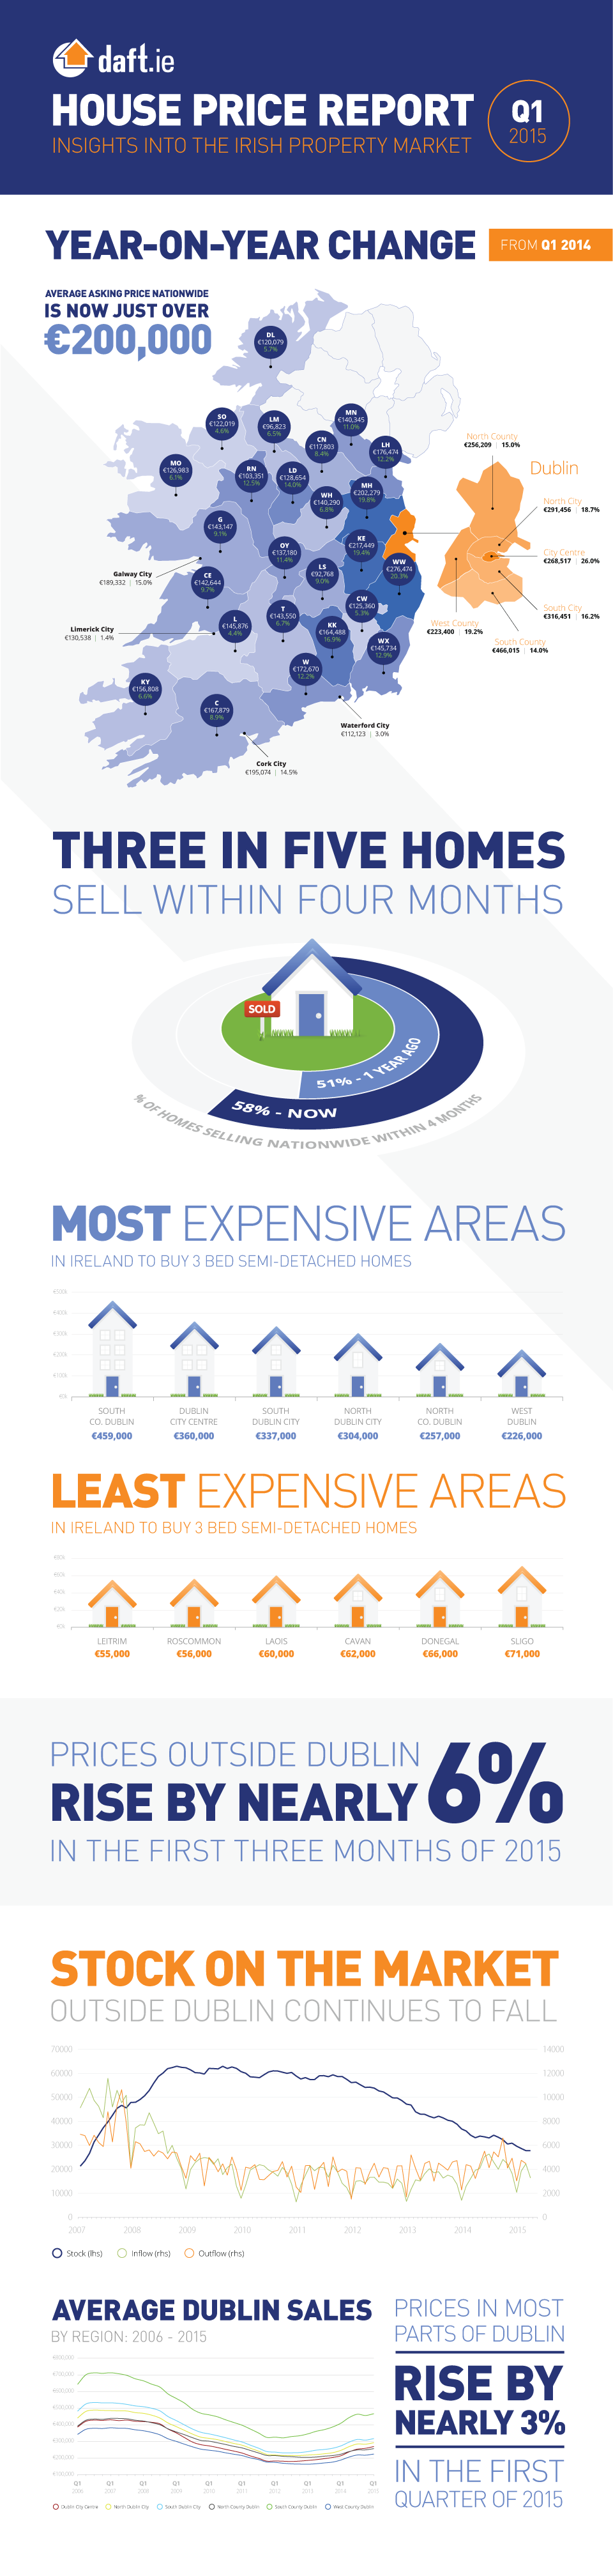 Daft.ie House Price Report: Q1, 2015 Infographic